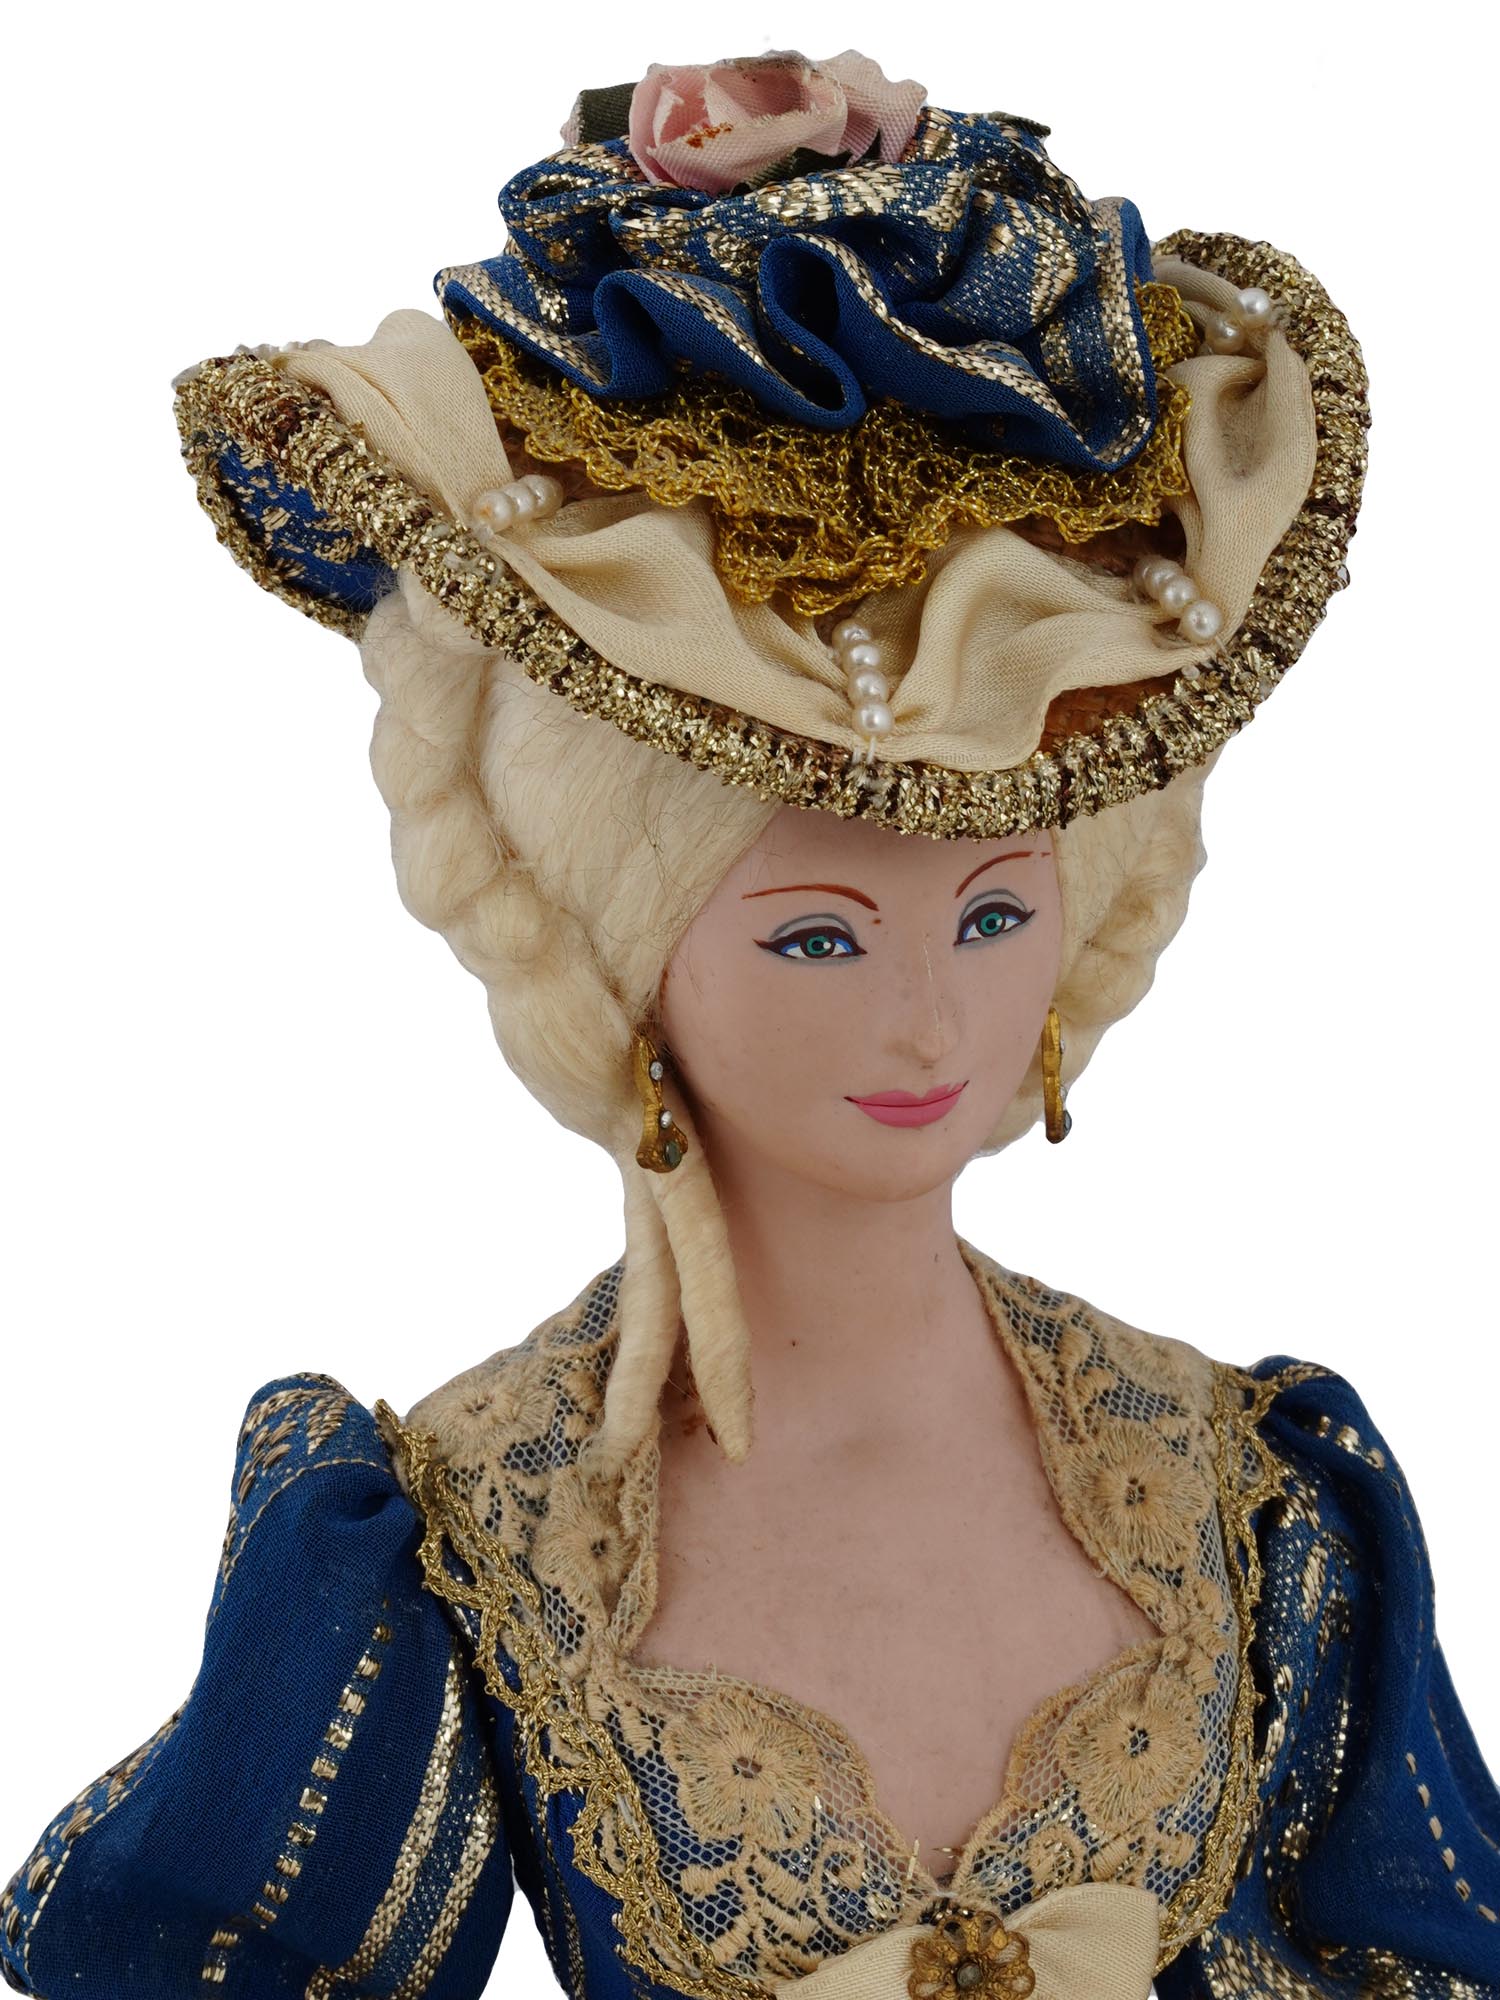 MARIE ANTOINETTE LUIS XV HISTORICAL DOLLS BY MARIN PIC-7